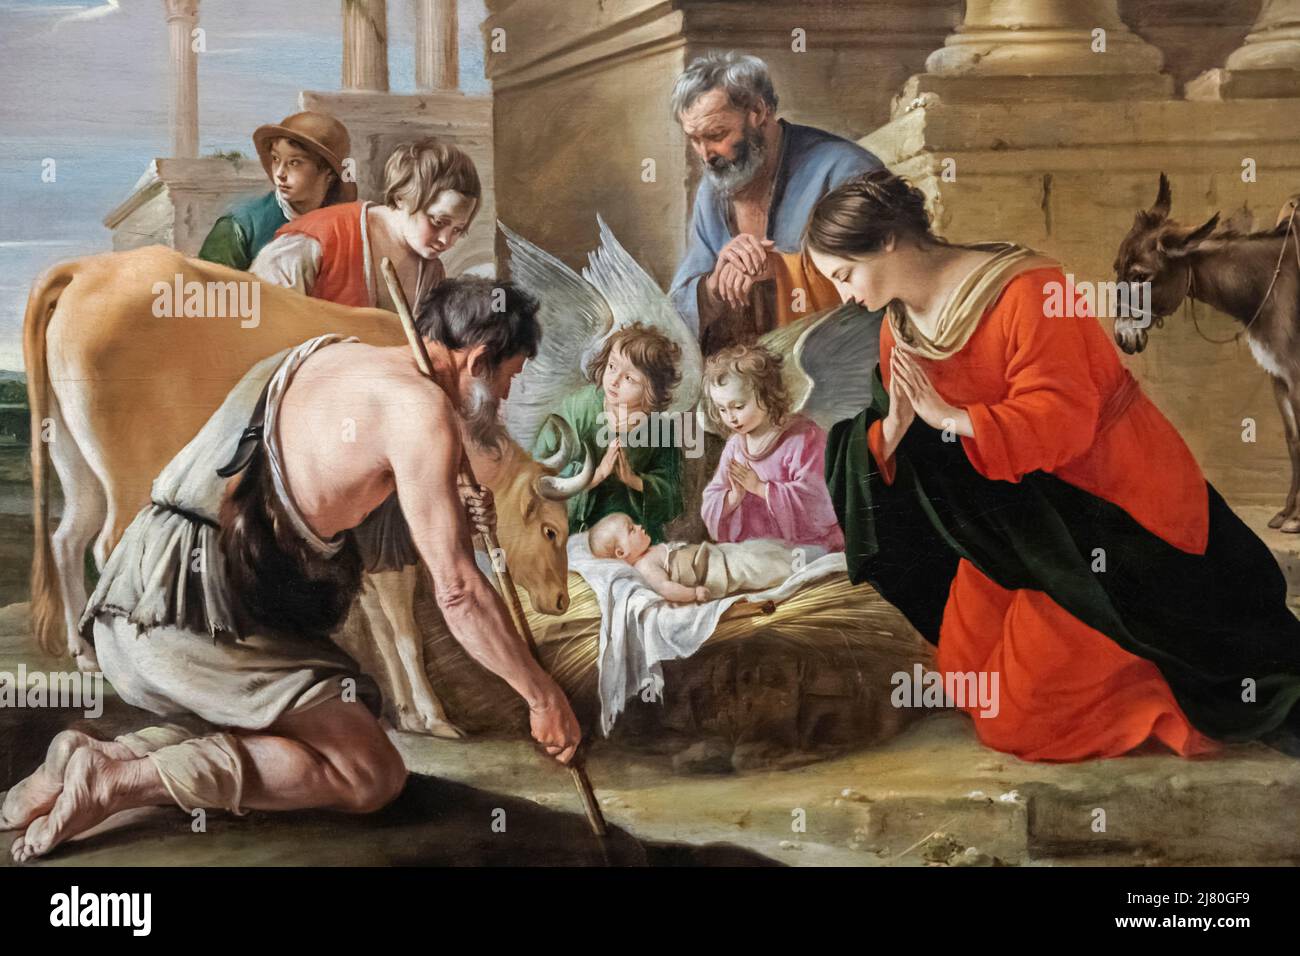 Painting titled 'The Adoration of the Shepherds' by The Le Nain Brothers dated 1640 Stock Photo